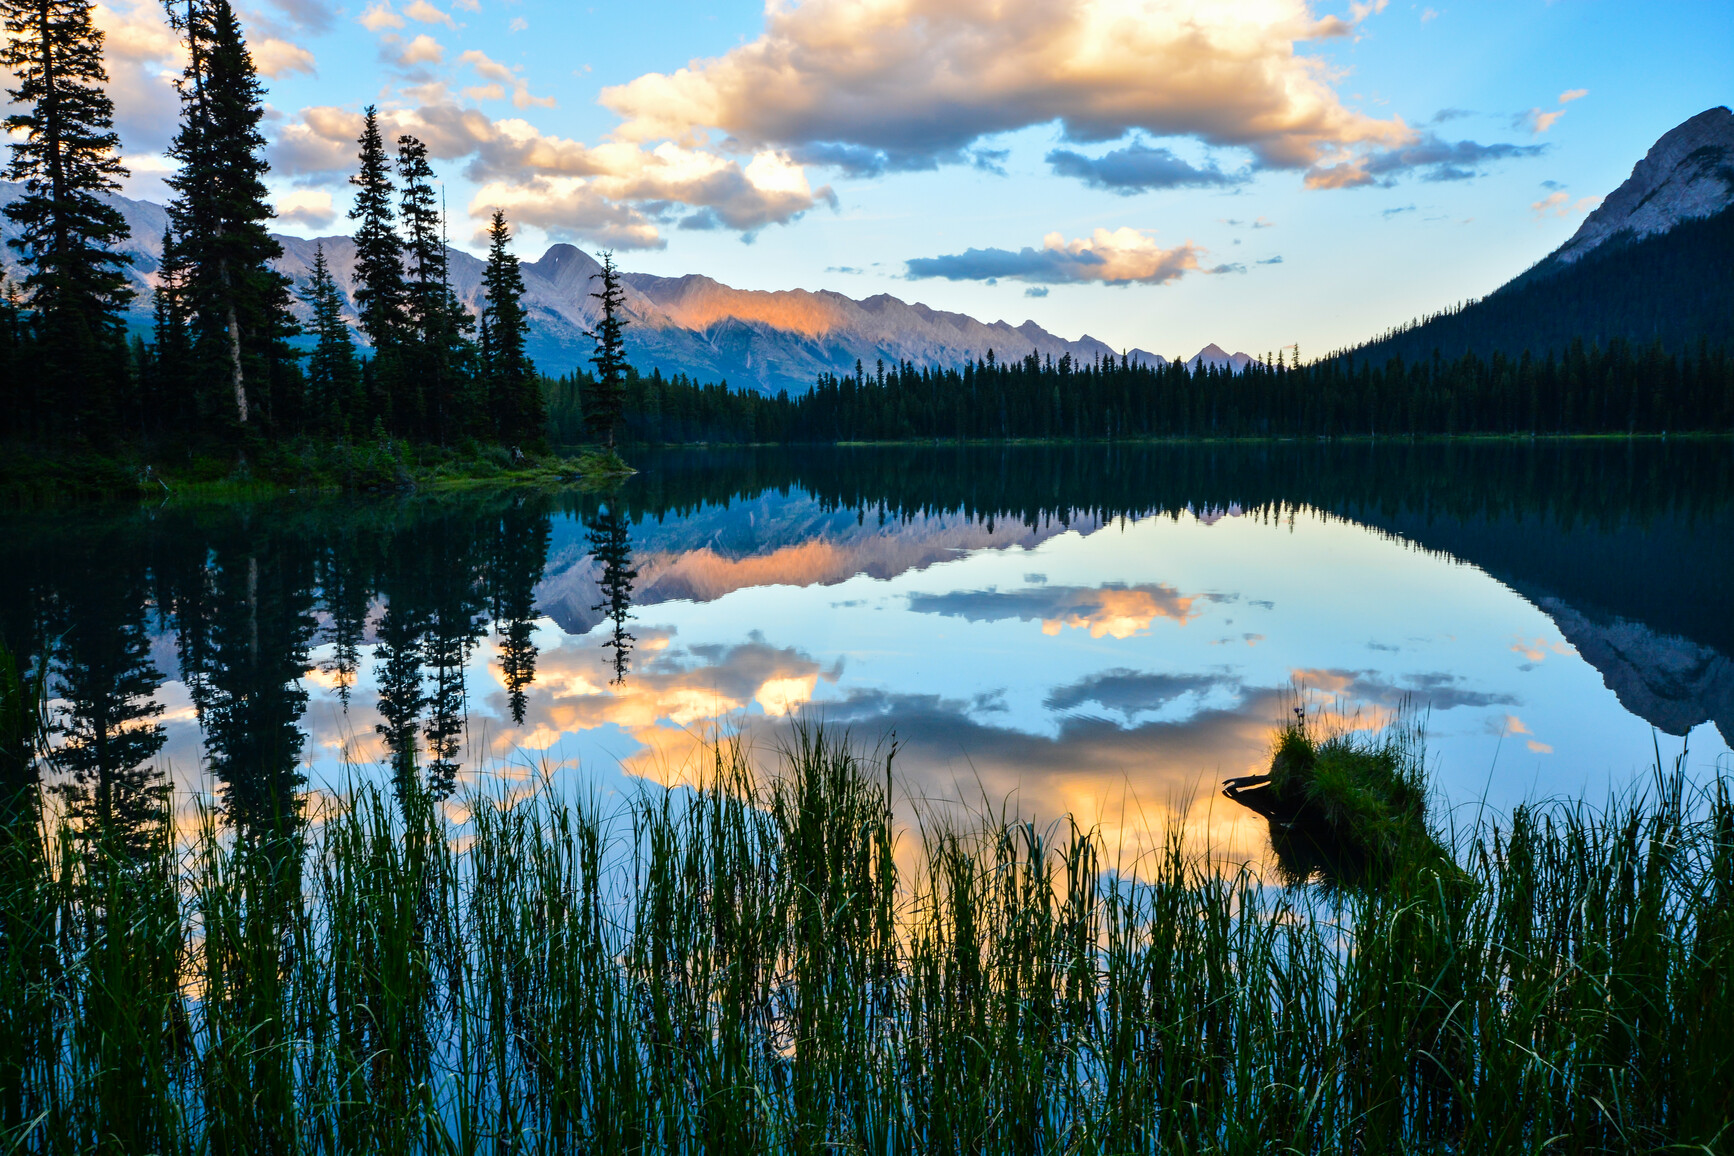 Elk Lake at early dawn. The calm lake reflects a perfect image of the surrounding forest and clouds above. The mountains glow orange in the distance.